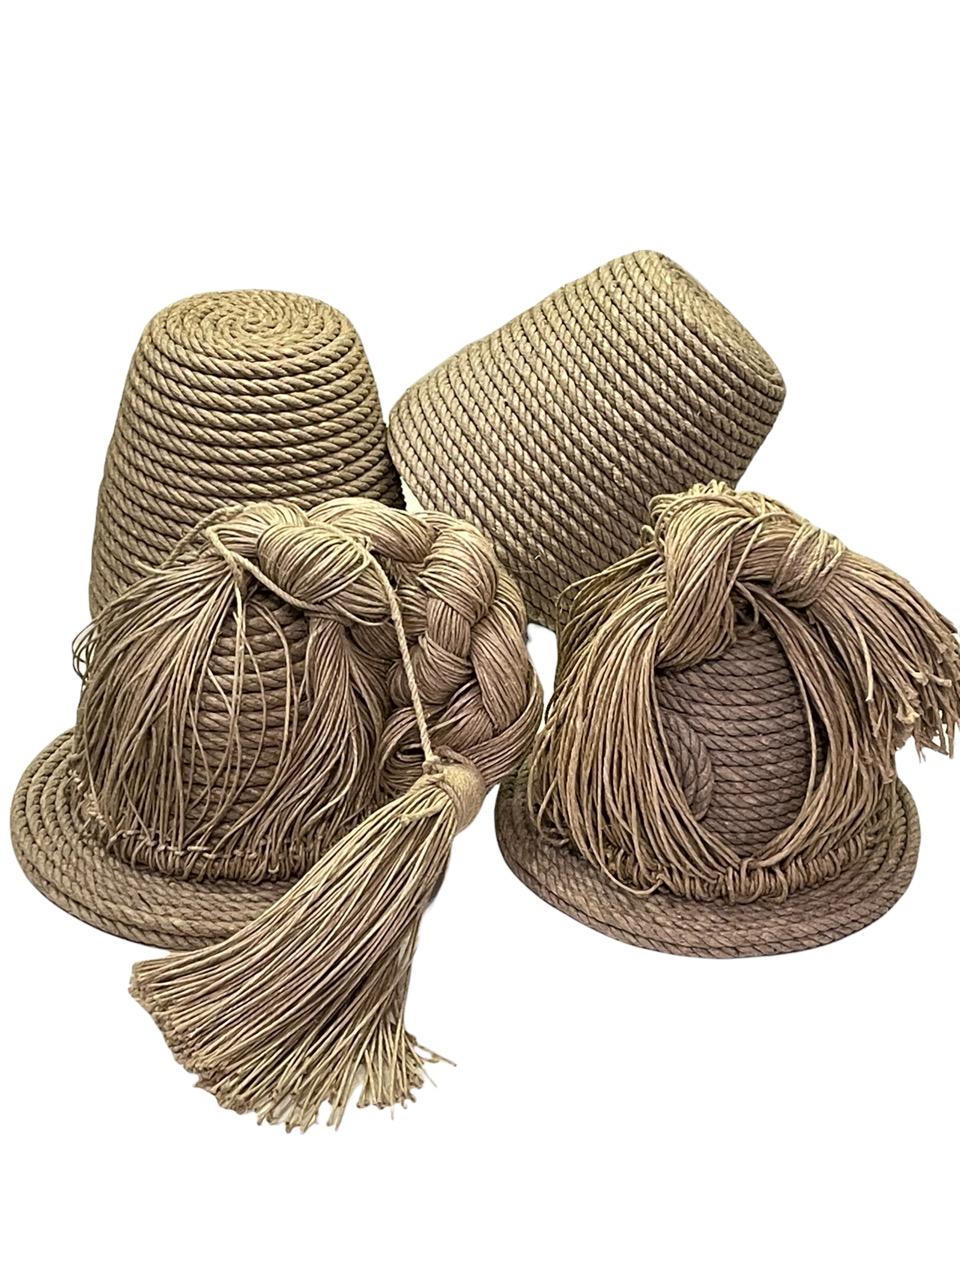 Pair of Contemporary 21st Century French Christian Astuguevieille Jute Rope Co 5